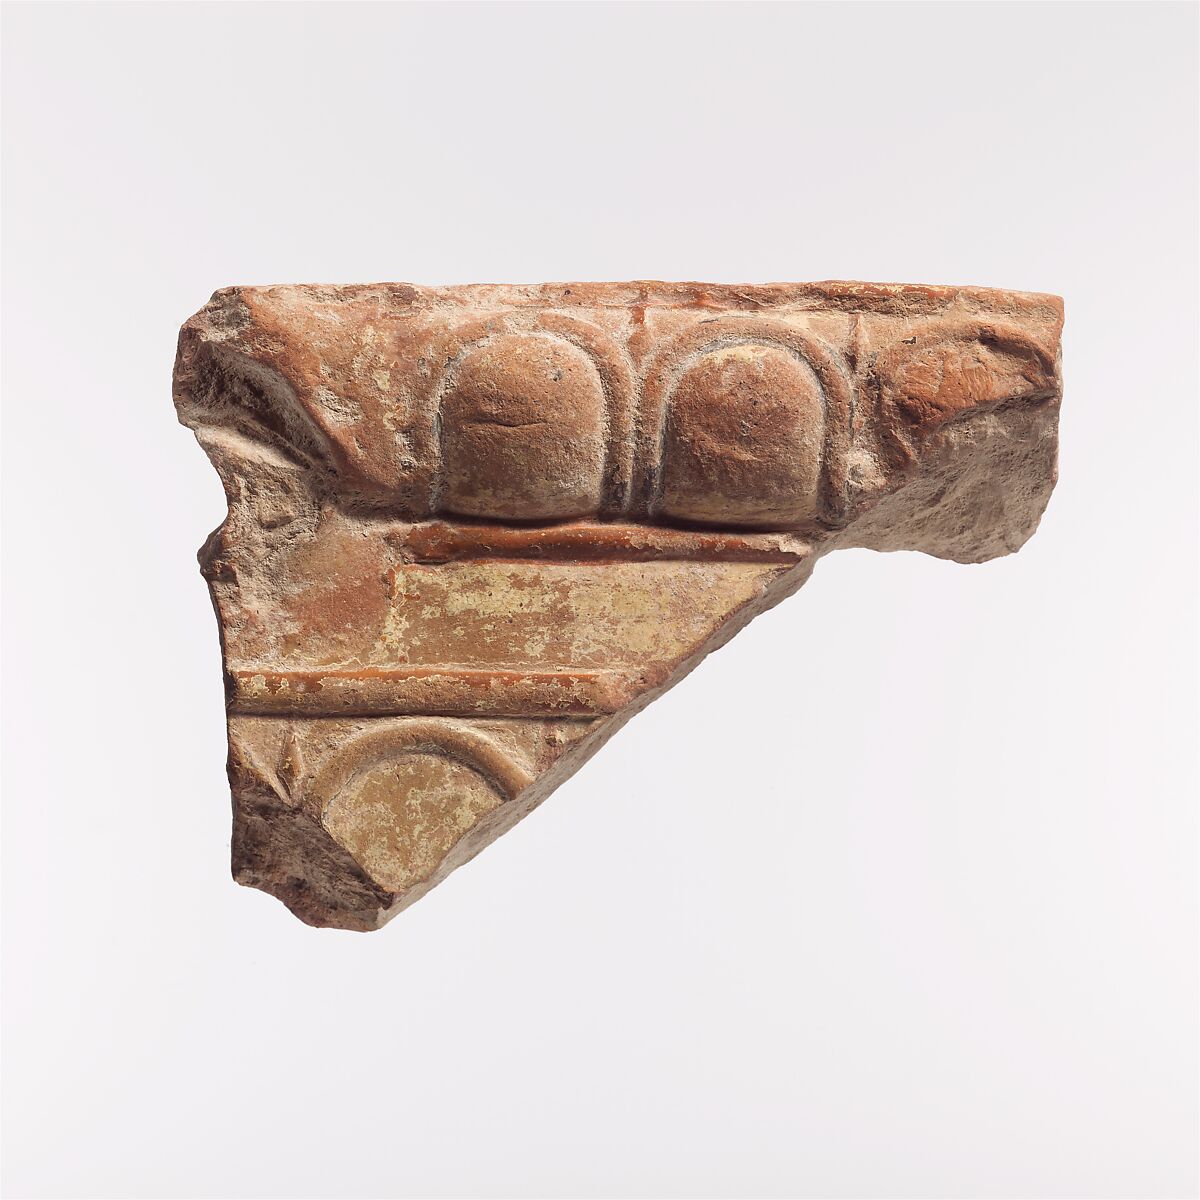 Fragment of a terracotta architectural tile, Terracotta, Lydian 